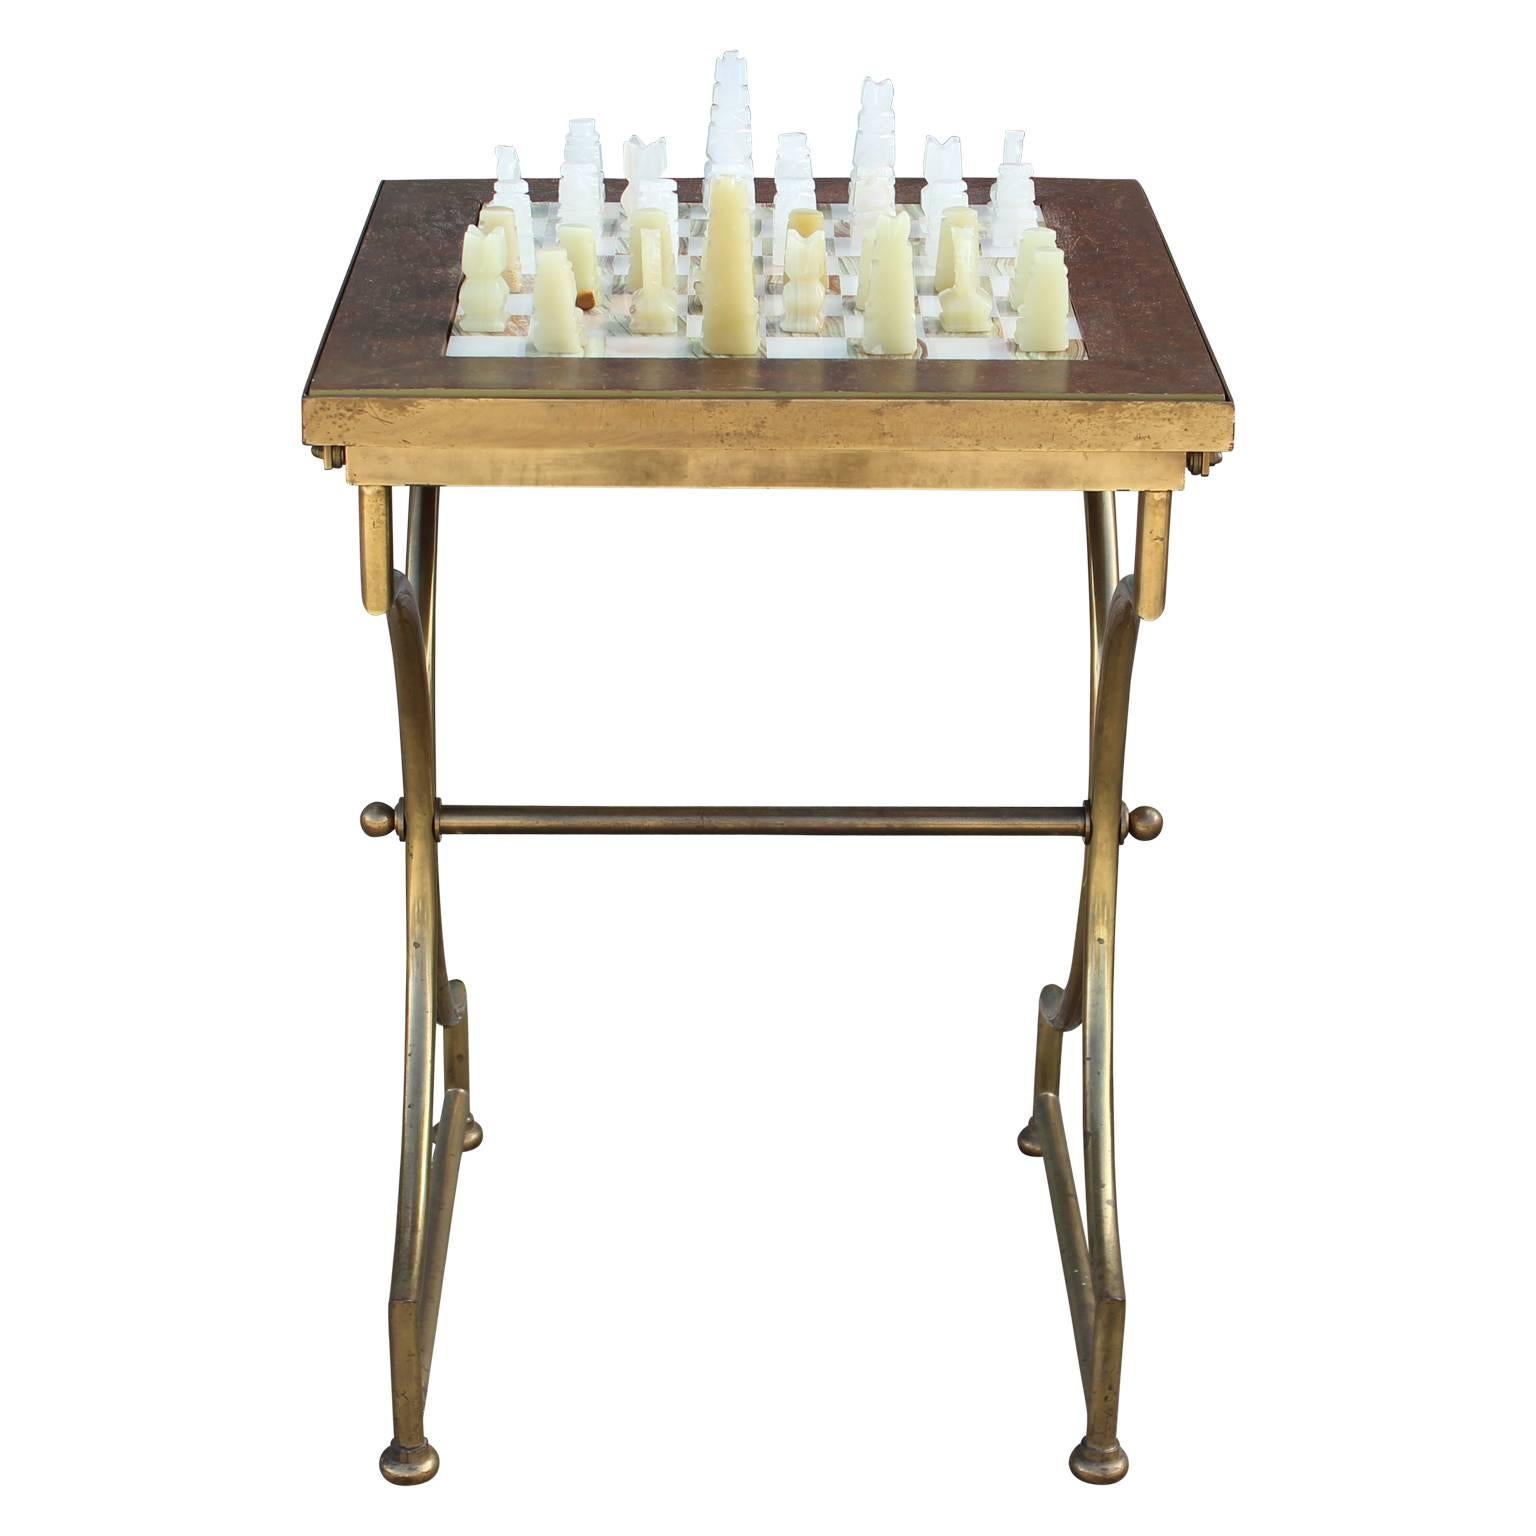 Hollywood Regency Modern Square Onyx Chess Table with Brass Base and Onyx Chess Set